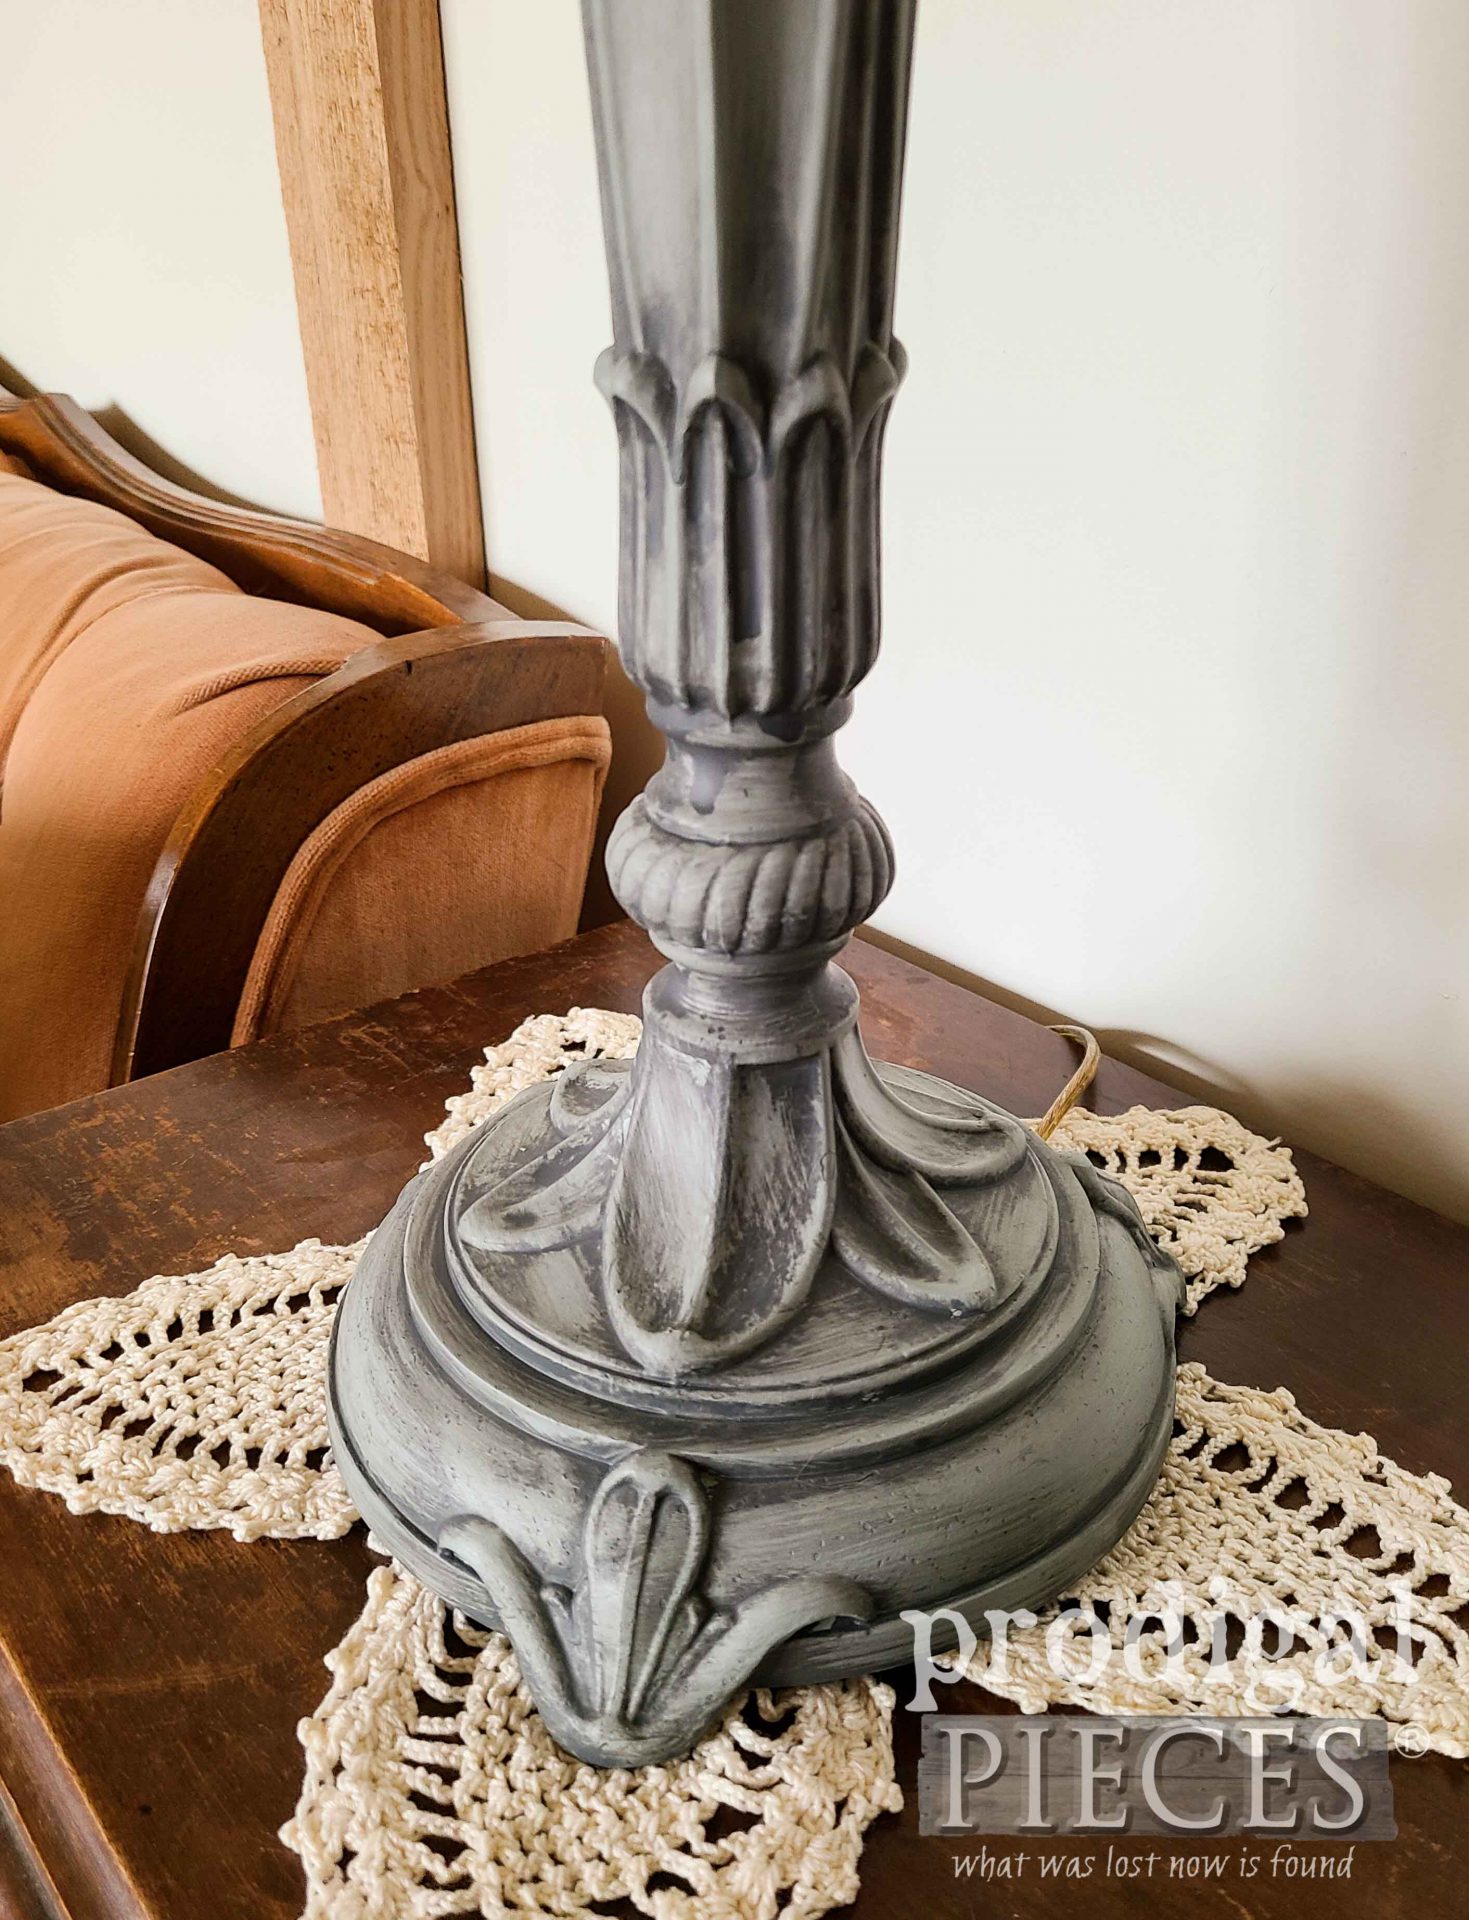 Upclose Look at Painted Table Lamps with Glazing by Larissa of Prodigal Pieces | prodigalpieces.com #prodigalpieces #home #diy #homedecor